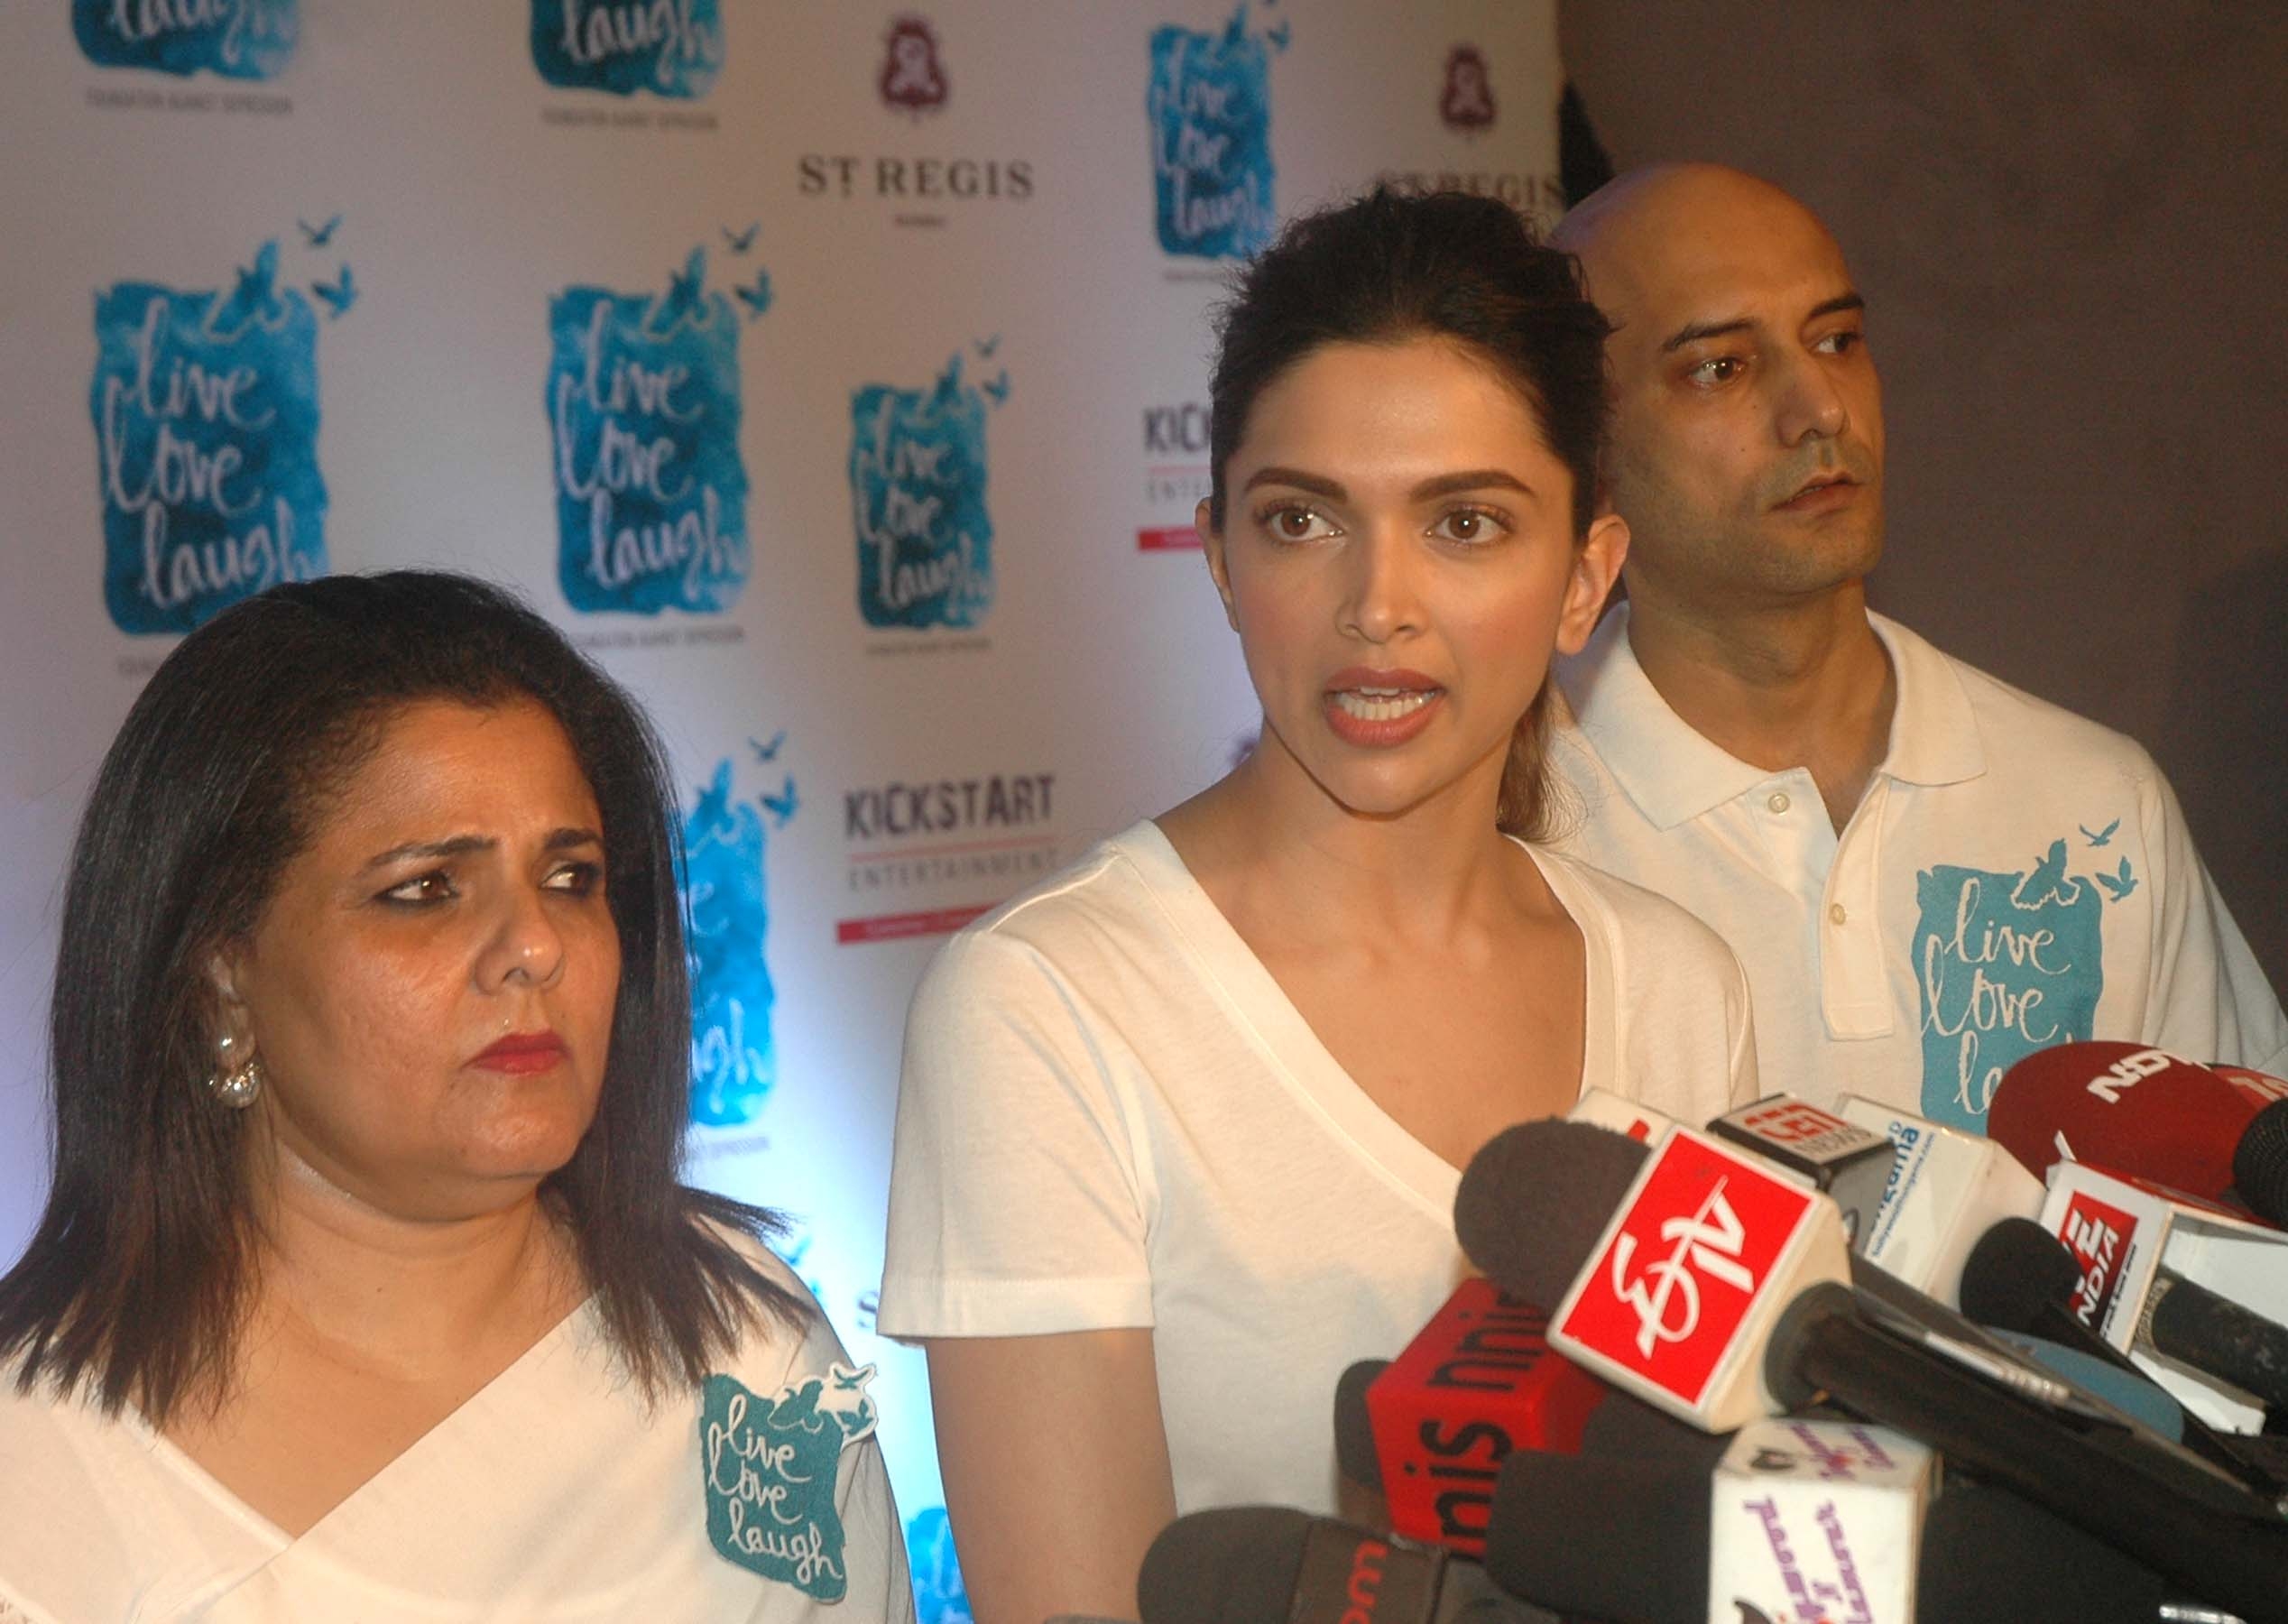 Deepika Padukone during the launch of her NGO The Live Love Laugh Foundation in Mumbai